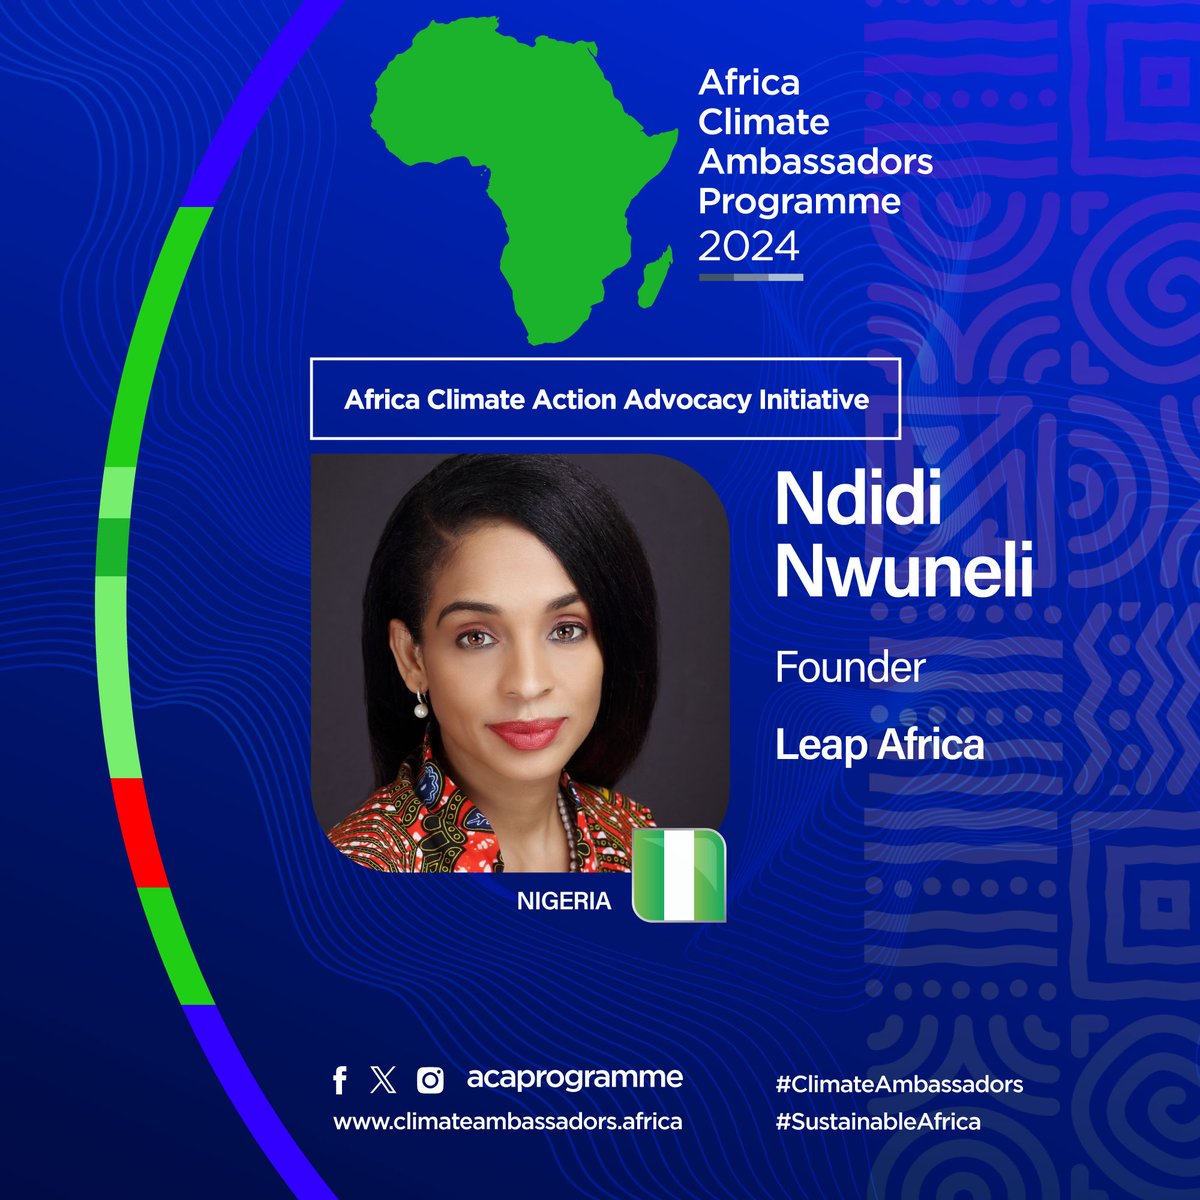 Meet ACAP Ambassador @ndidiNwuneli from Nigeria, an expert on food ecosystems, social innovation, and philanthropy. She's the Founder of @LEAPAfrica and President/CEO of the @ONECampaign. She is an #ArchbishopTutuFellow and joins the programme under the Agriculture pillar.